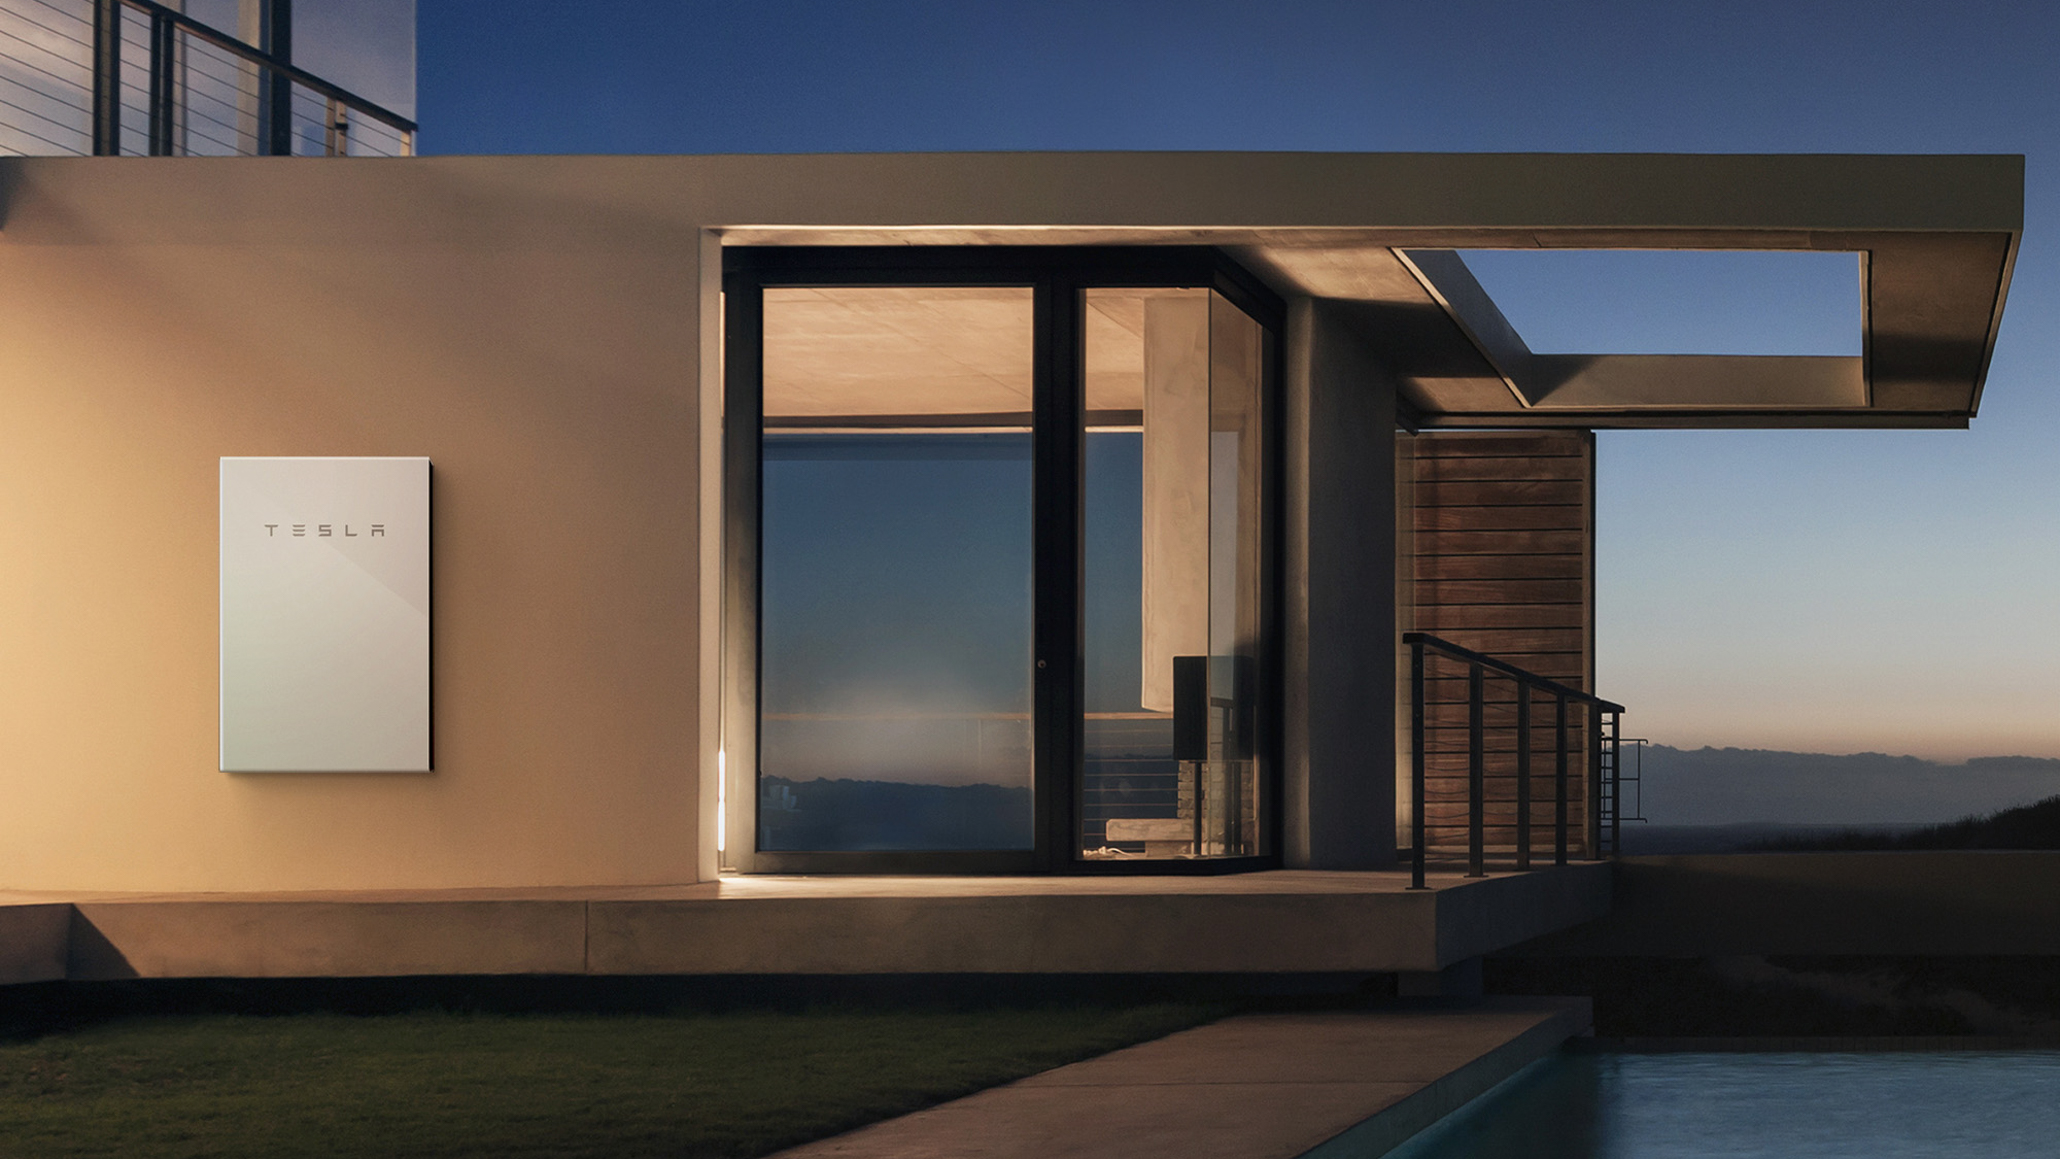 The Tesla Powerwall 2 storage battery works in tandem with rooftop solar panels to save more on energy costs. Image: Tesla.